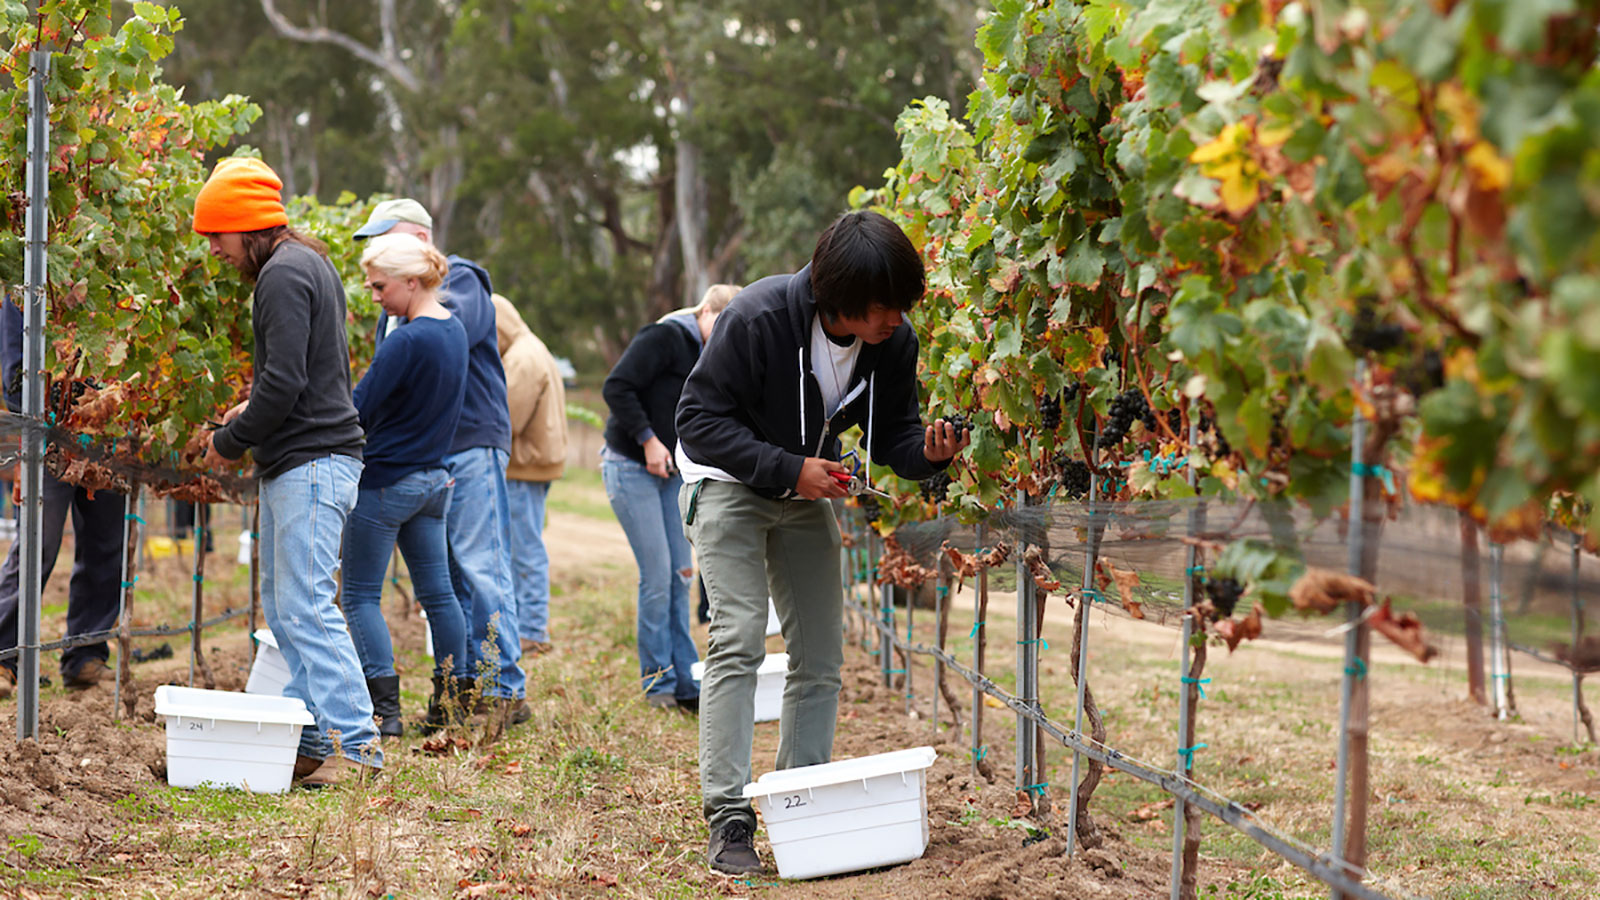 Students working in a vineyard